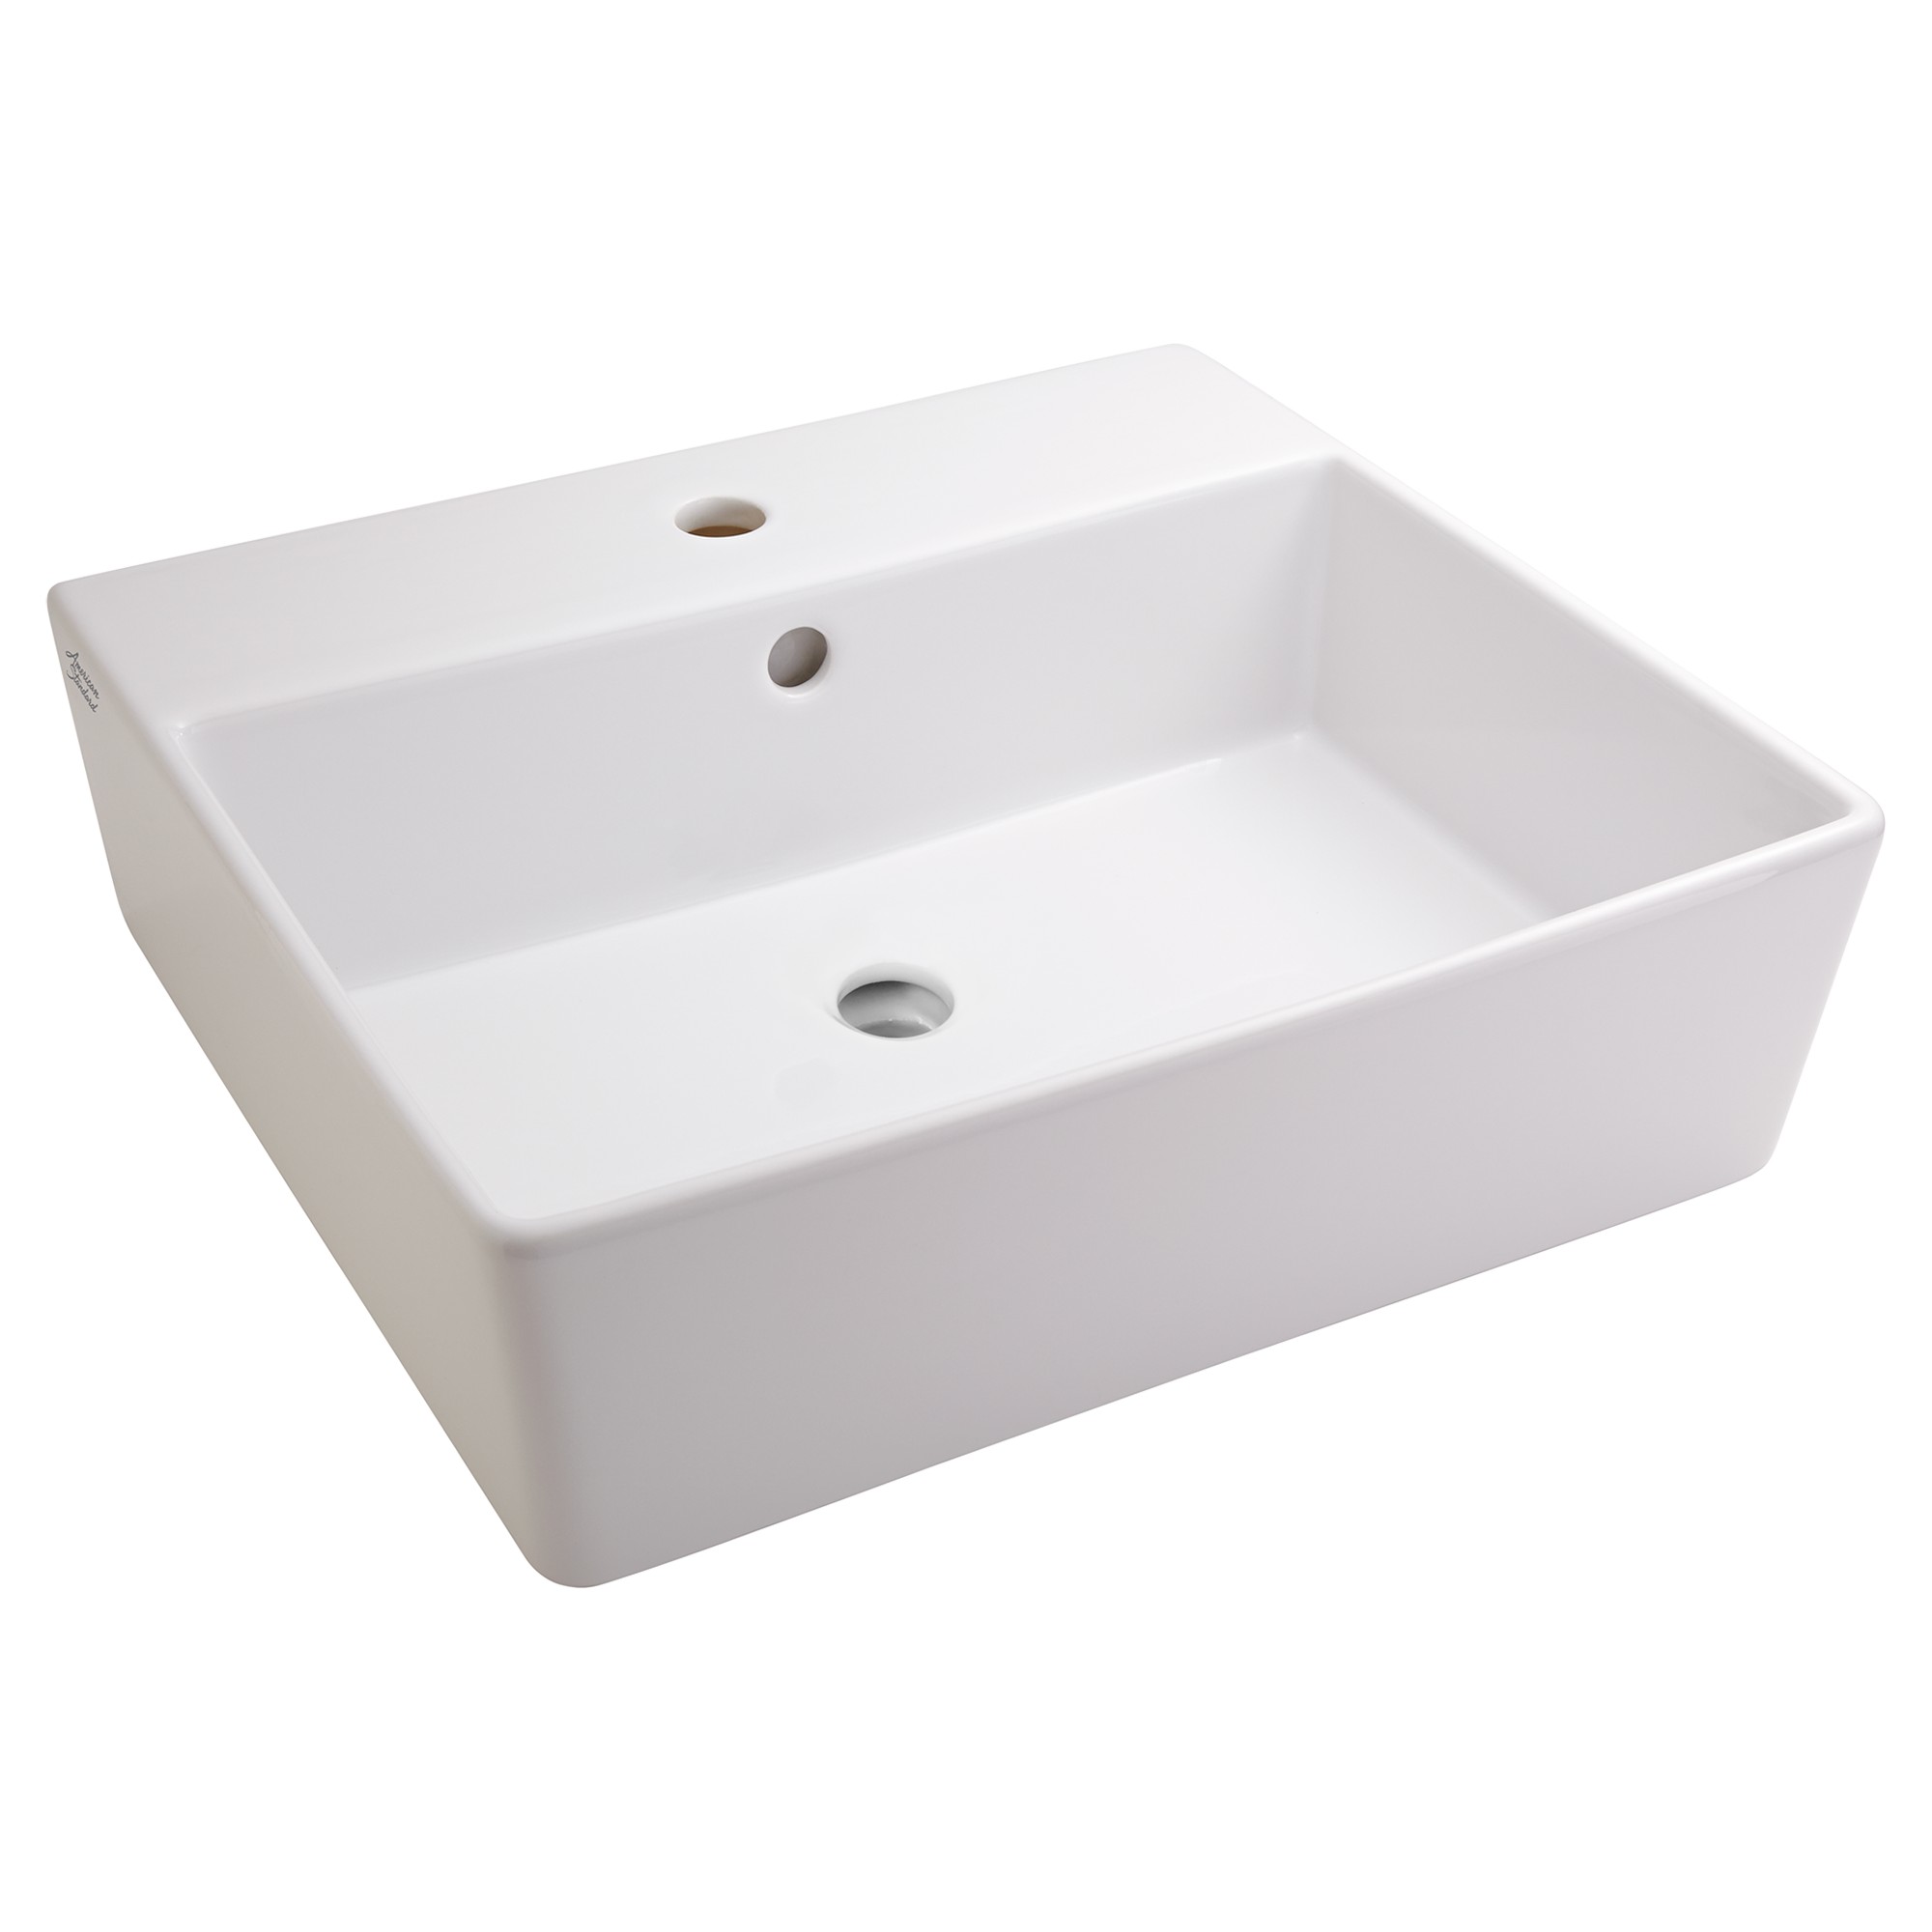 American Standard | 0552.001.020 | AMERICAN STANDARD 0552.001 LOFT ABOVE-COUNTER SINK WHT 020 WHITE 1-HOLE WITH REAR OVERFLOW